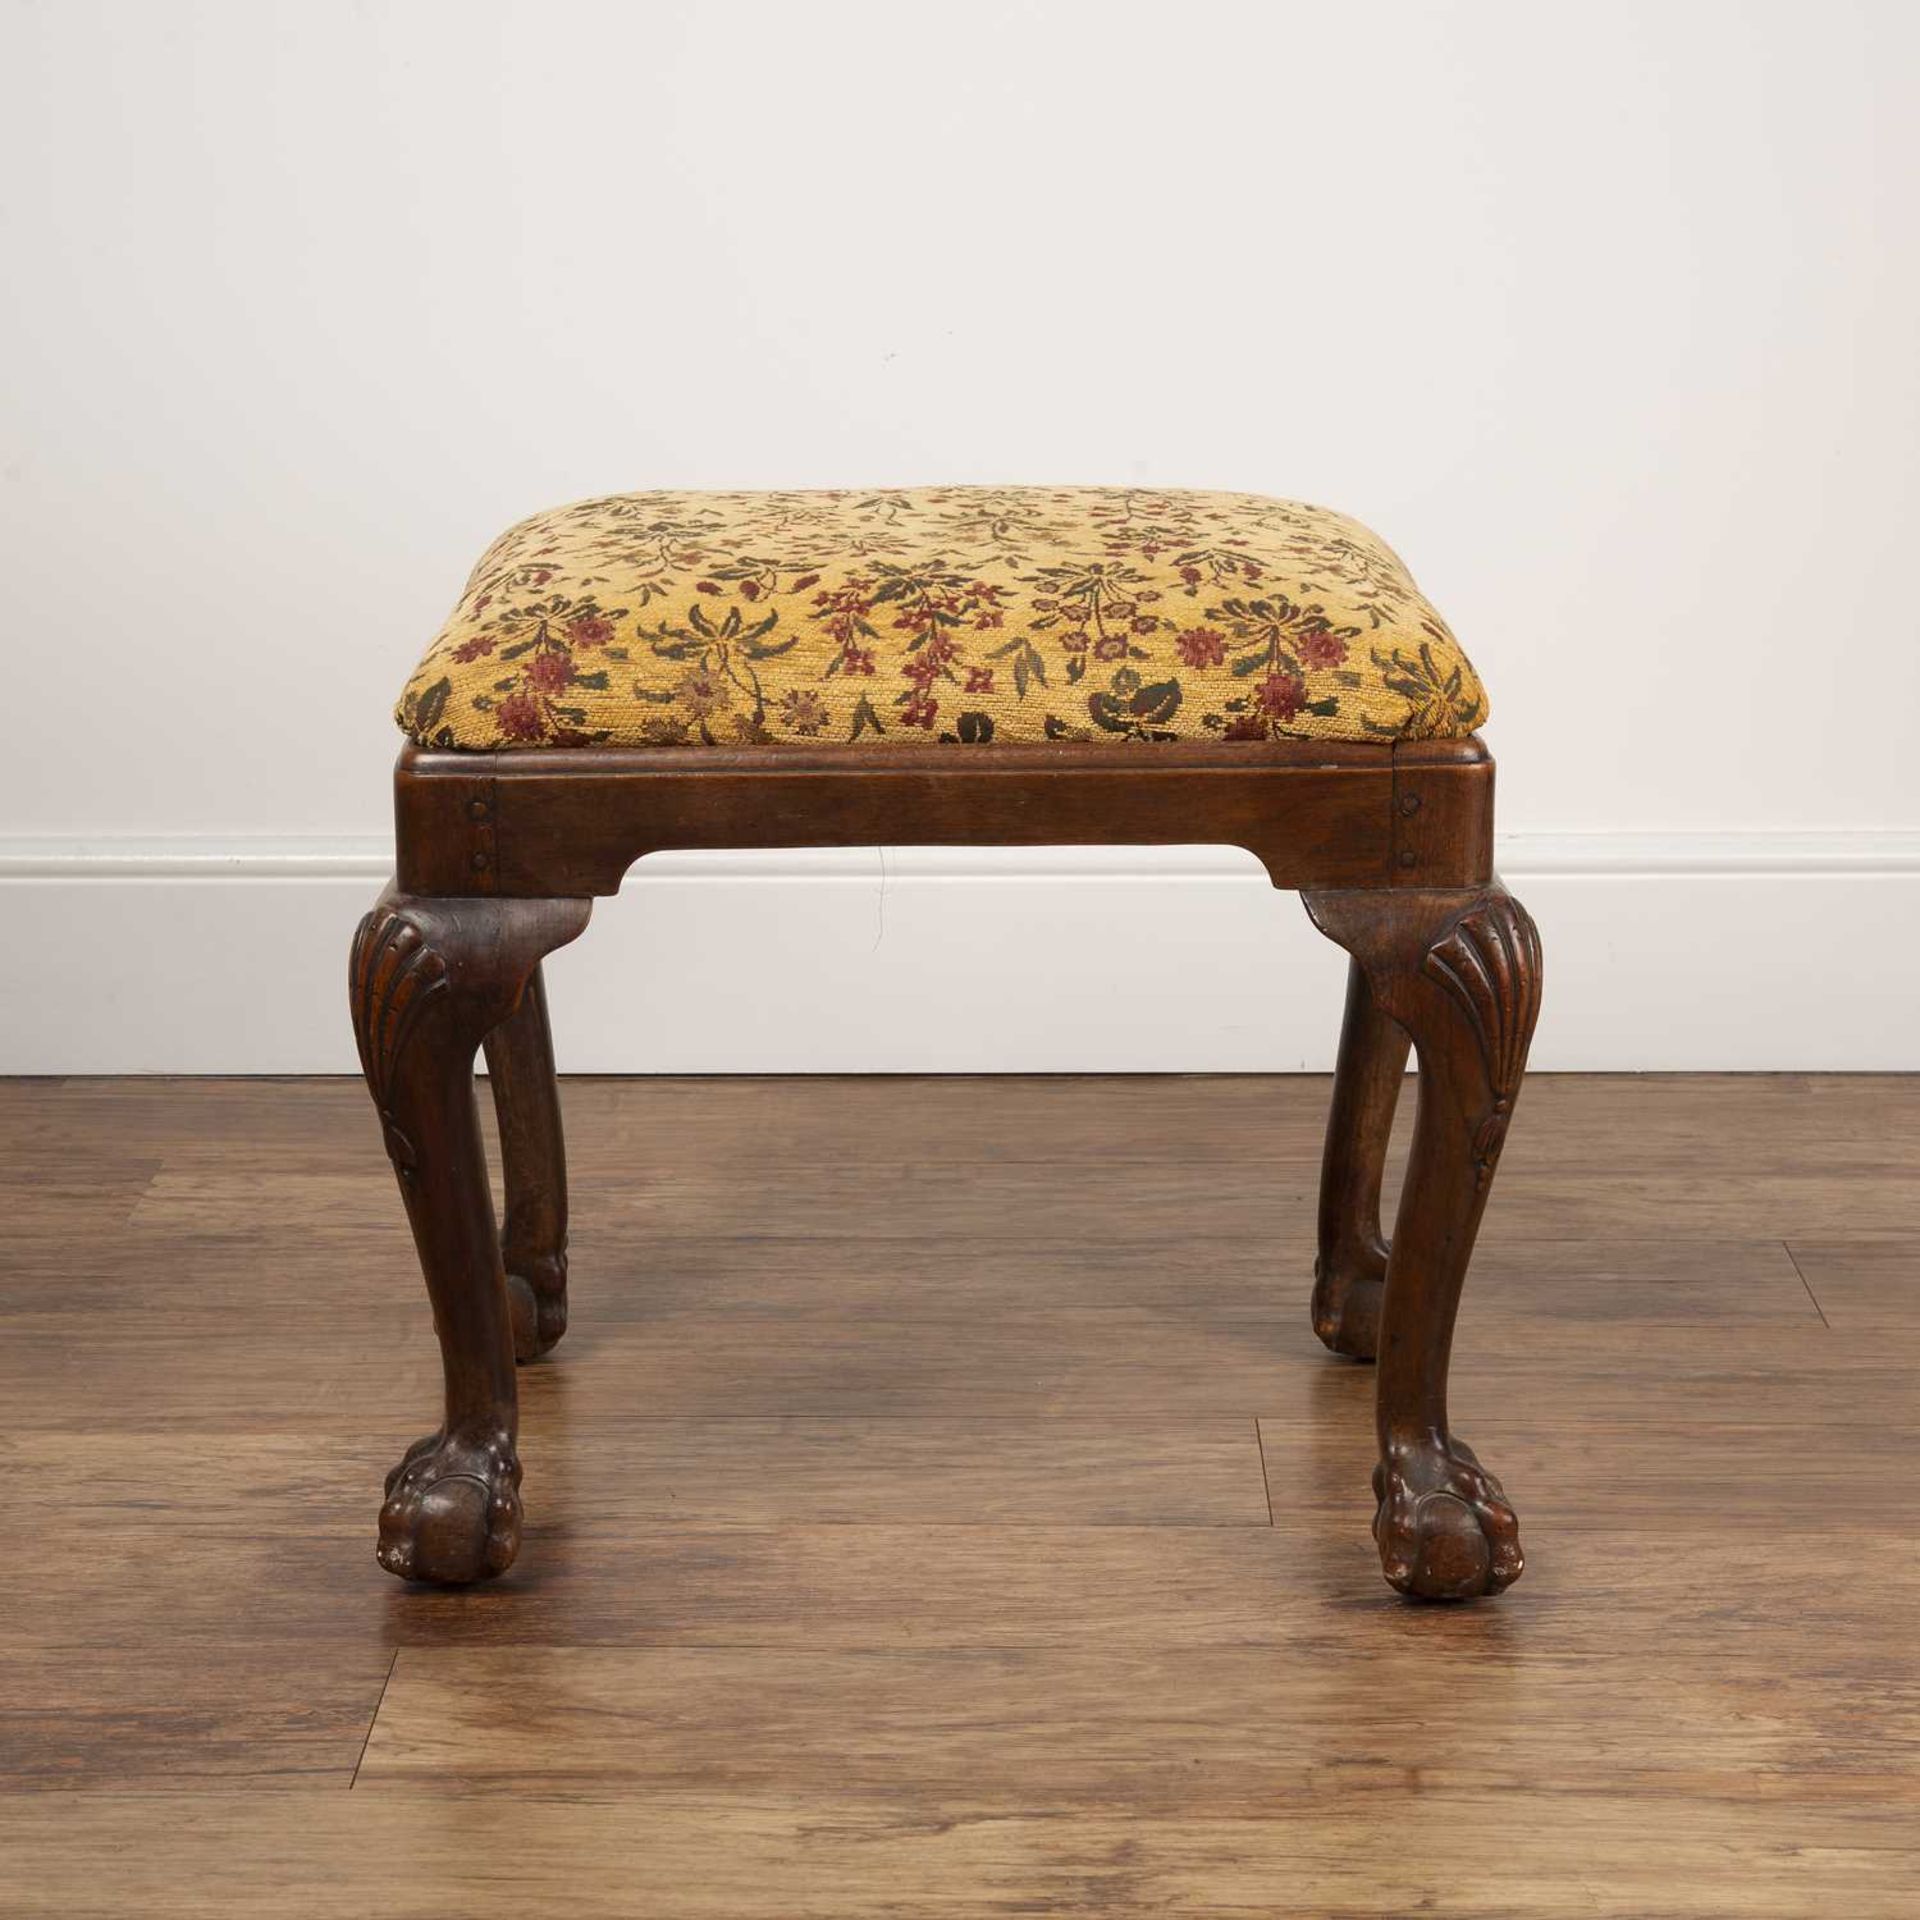 Mahogany stool 19th Century, in the Georgian style, on ball and claw feet, with yellow and floral - Image 2 of 3